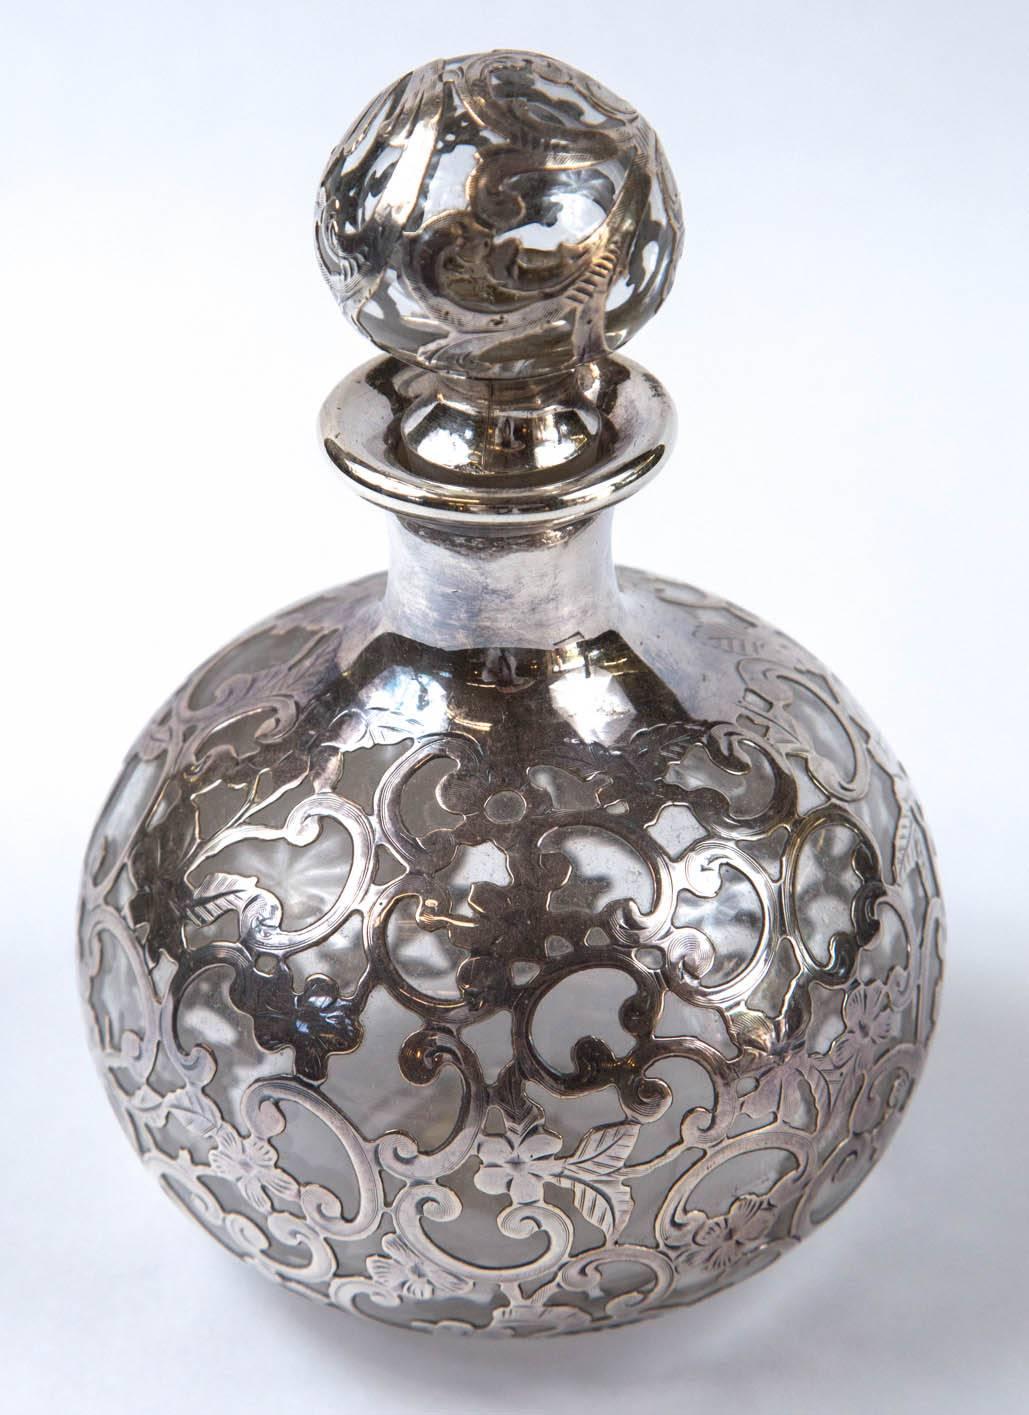 North American Antique Sterling Silver Overlay Perfume Bottle Monogrammed